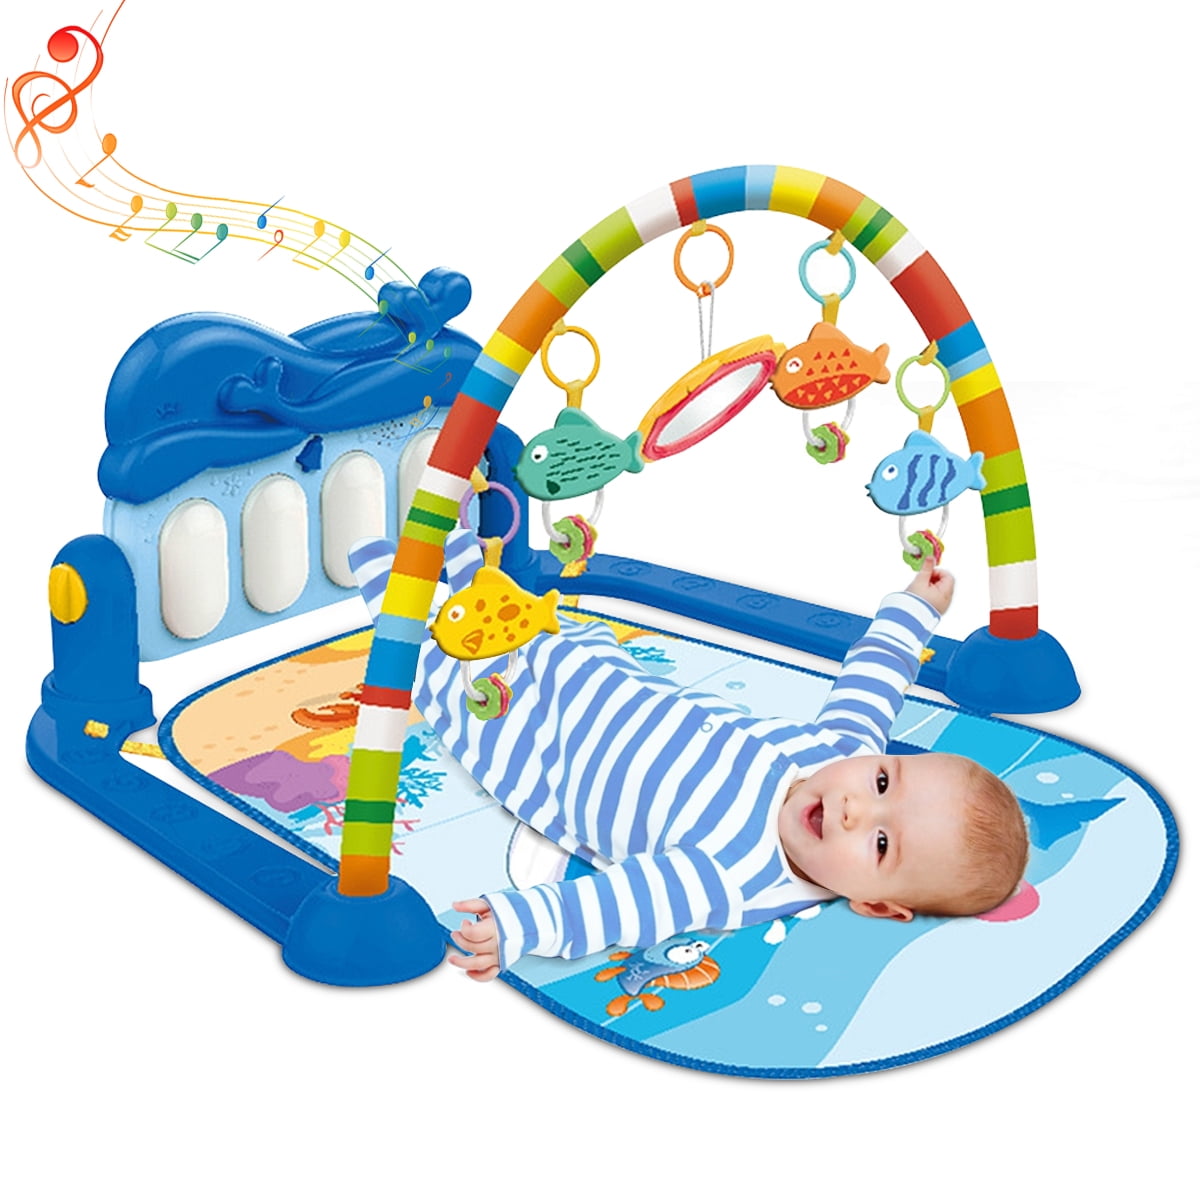 Printasaurus Play Mat Activity Gym for Baby Baby Game Pad Music Pedal Piano Music Fitness Rack Crawling Mat with Hanging Toys Lay to Sit-Up Play Mat Activity Center for Infants and Toddlers 